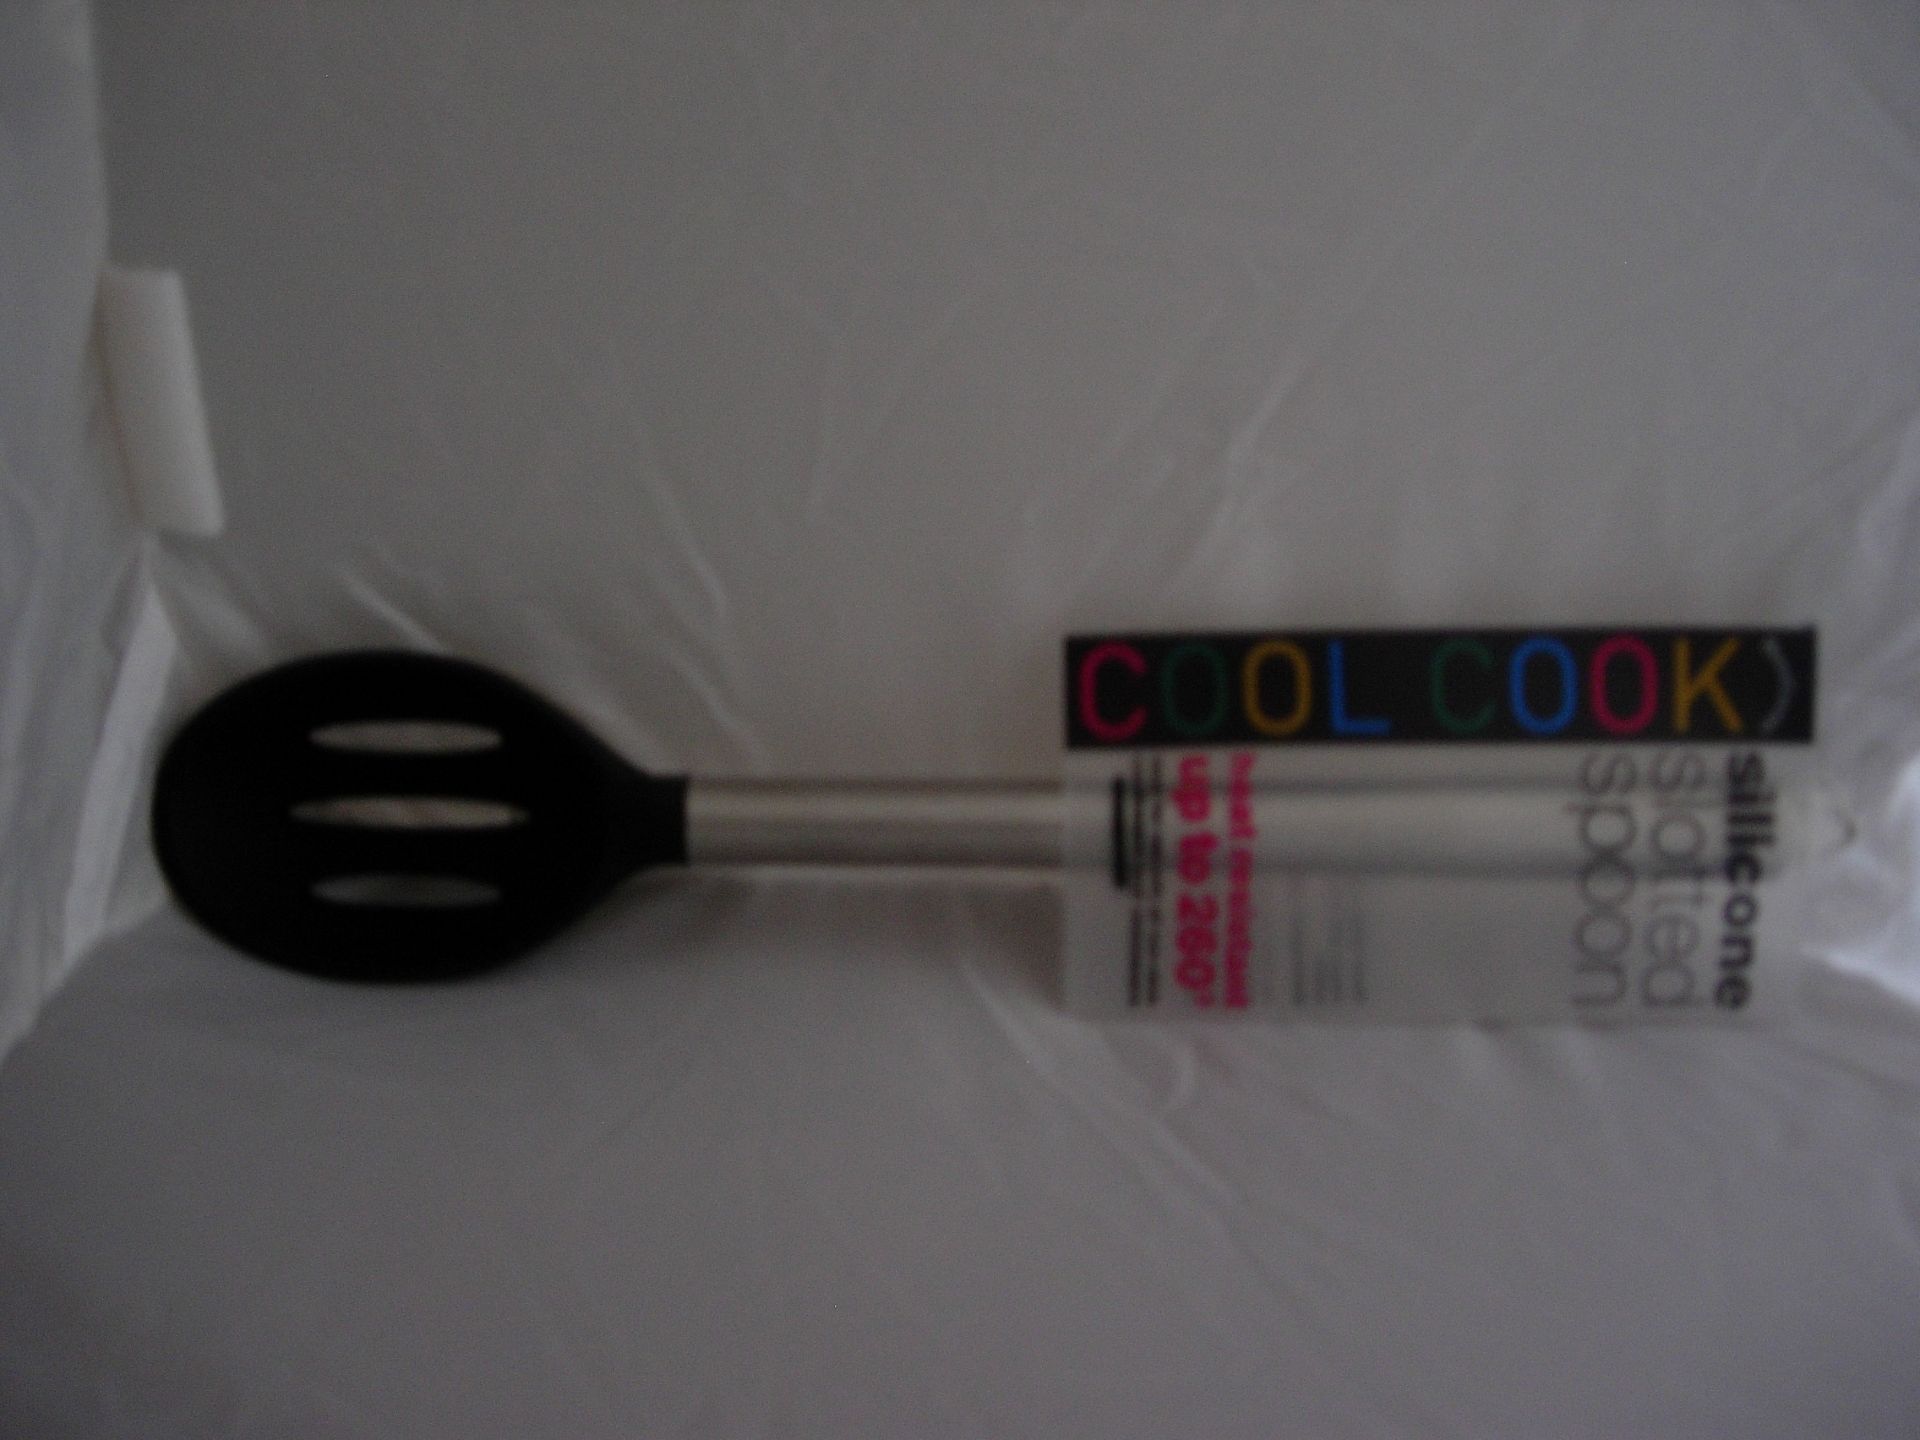 2Pks Of 6 Cool Cook Silicone Slotted Spoon - Image 2 of 5